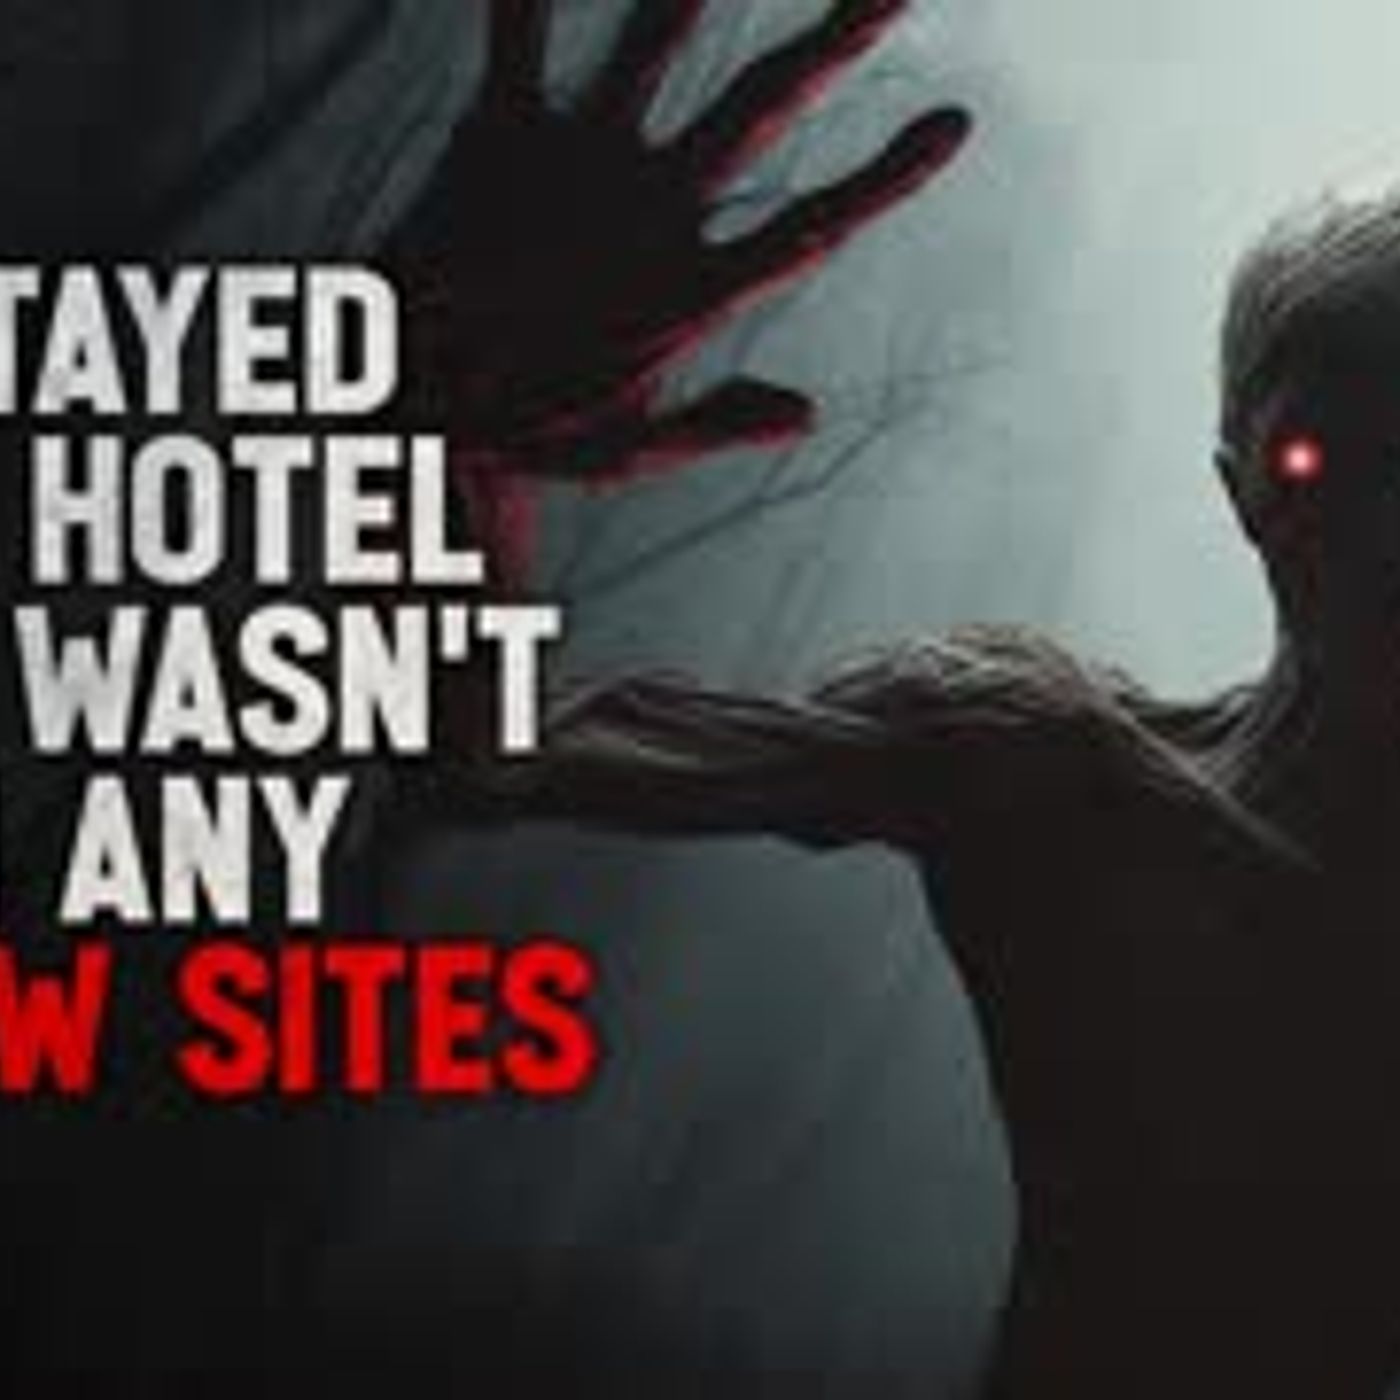 "I stayed in a hotel that wasn't on any review sites" Creepypasta